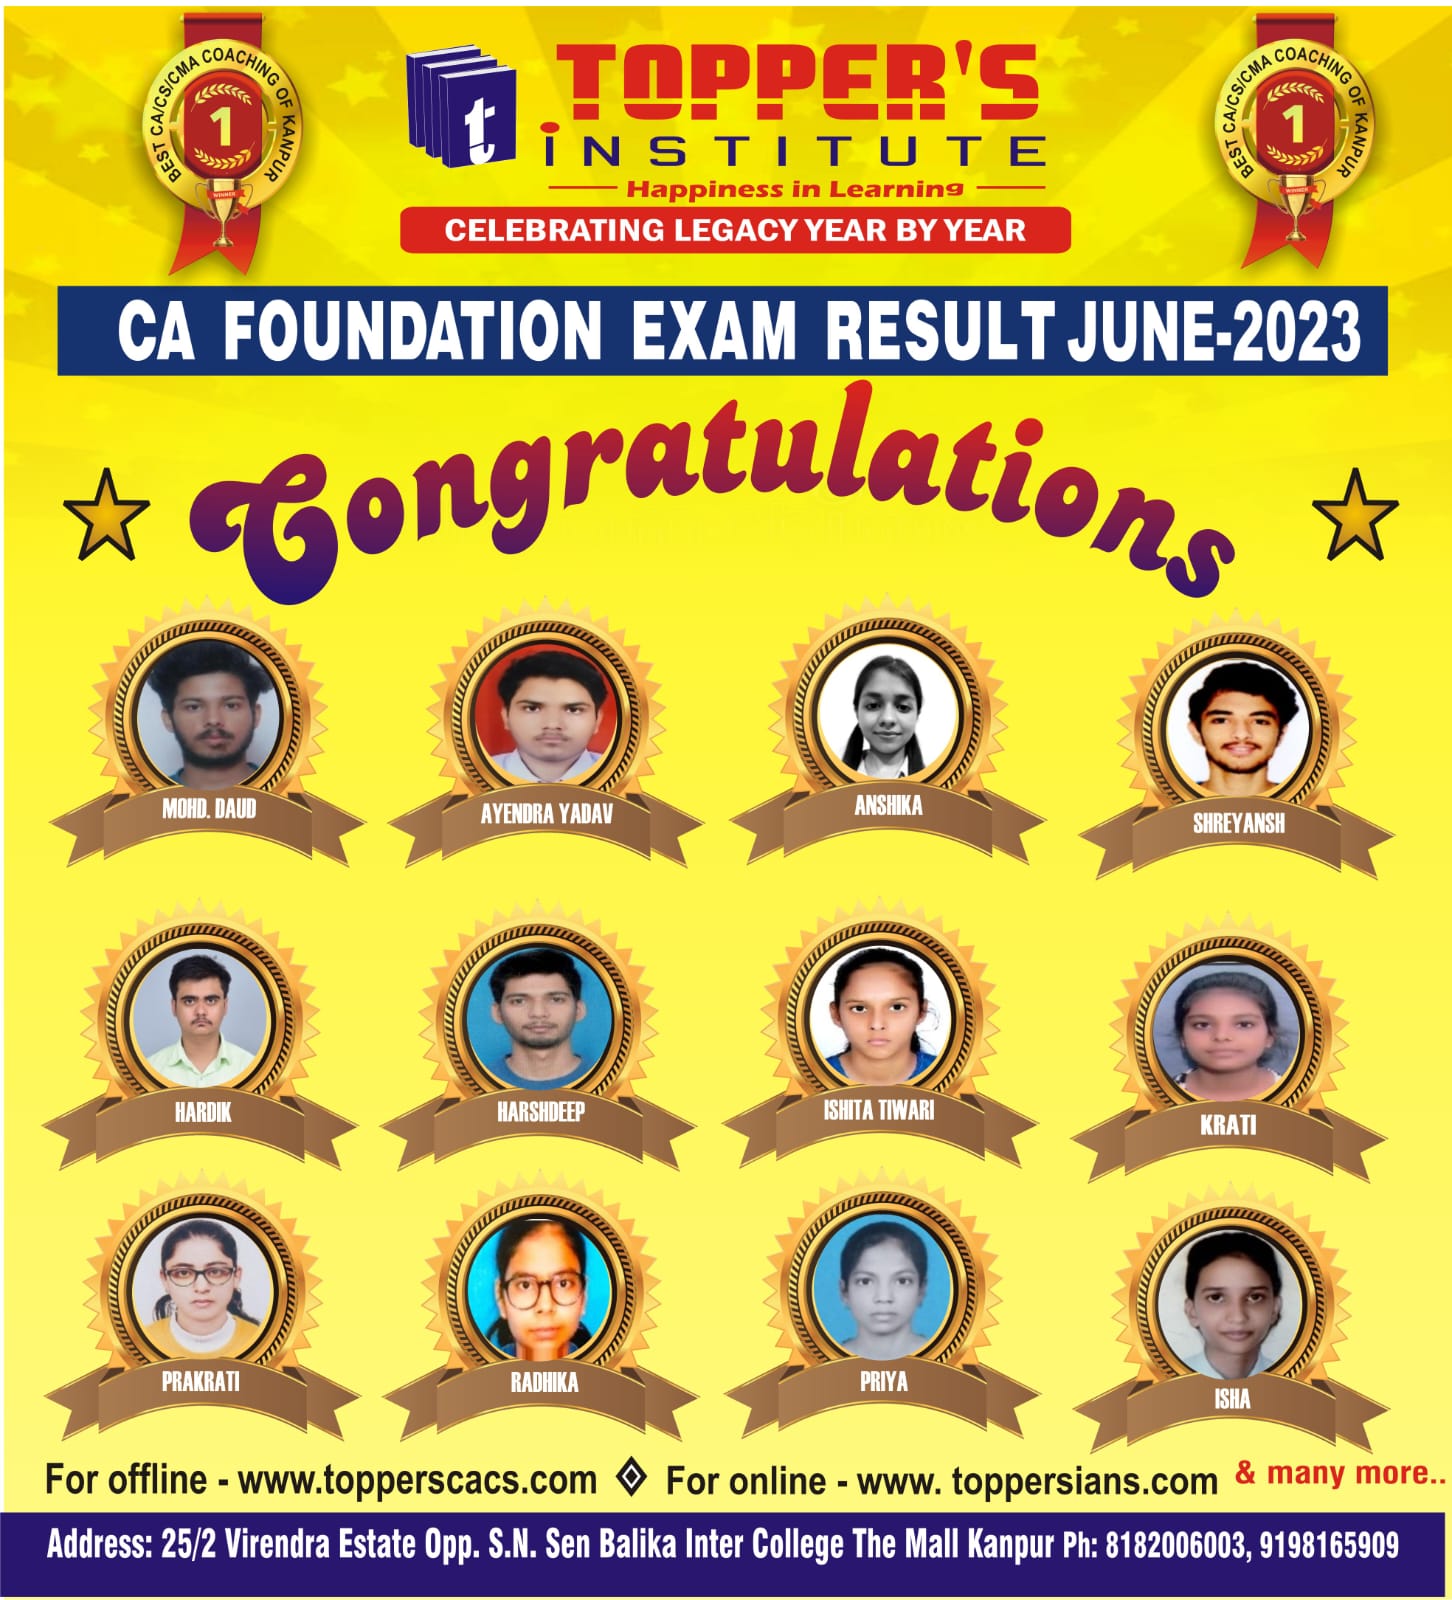 CSEET2020 RESULT OF TOPPERS INSTITUTE